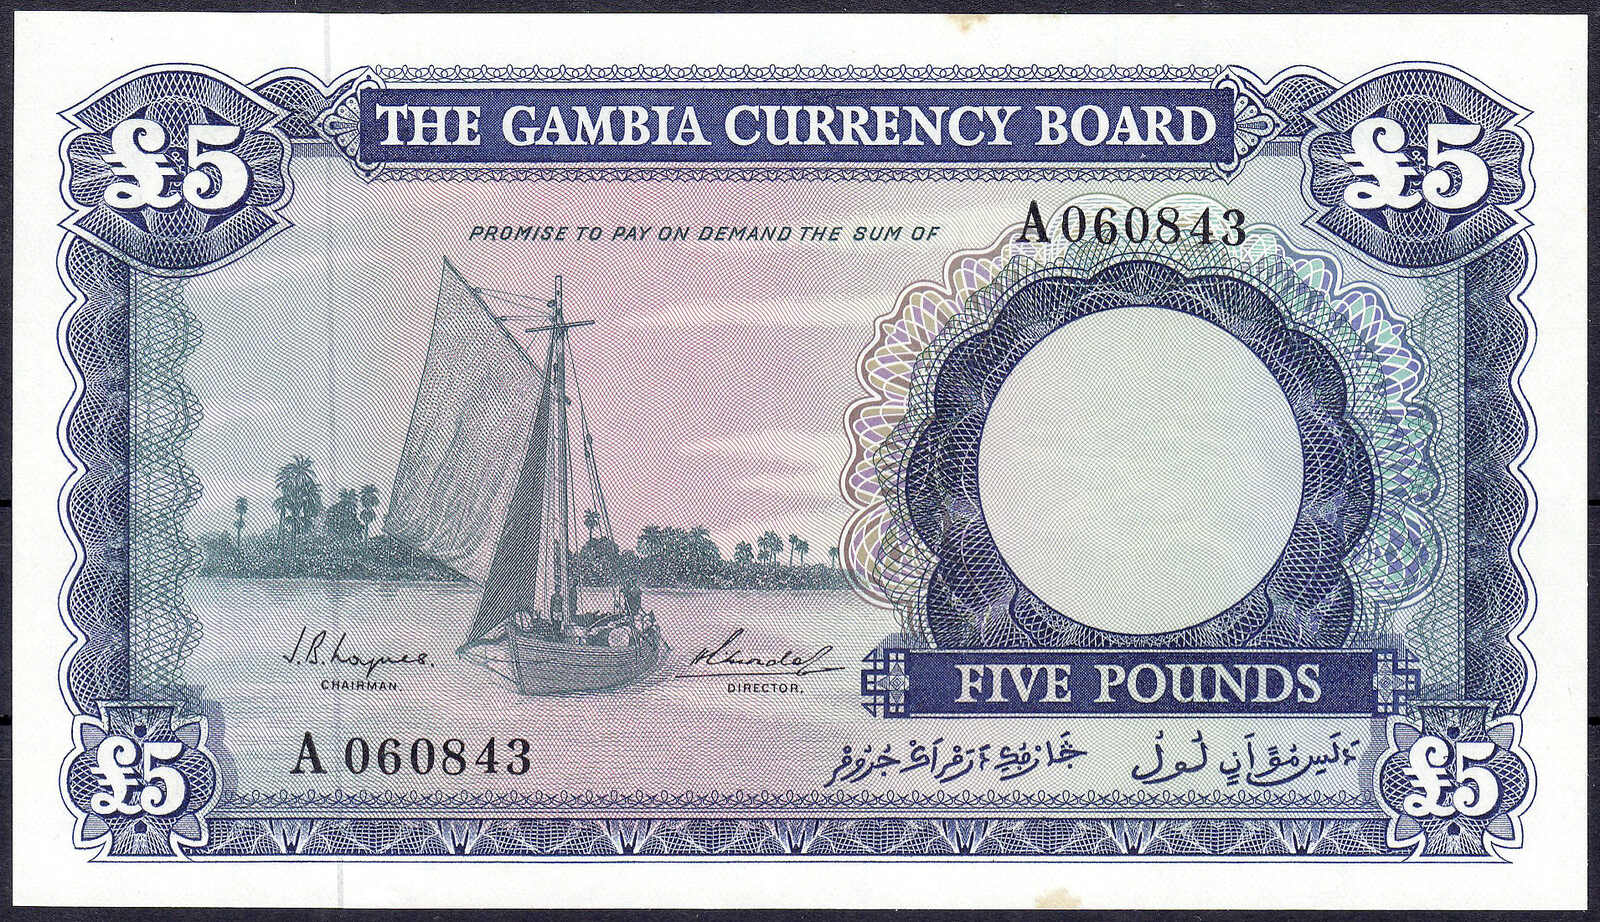 110.550.130: Banknotes – Africa - Gambia